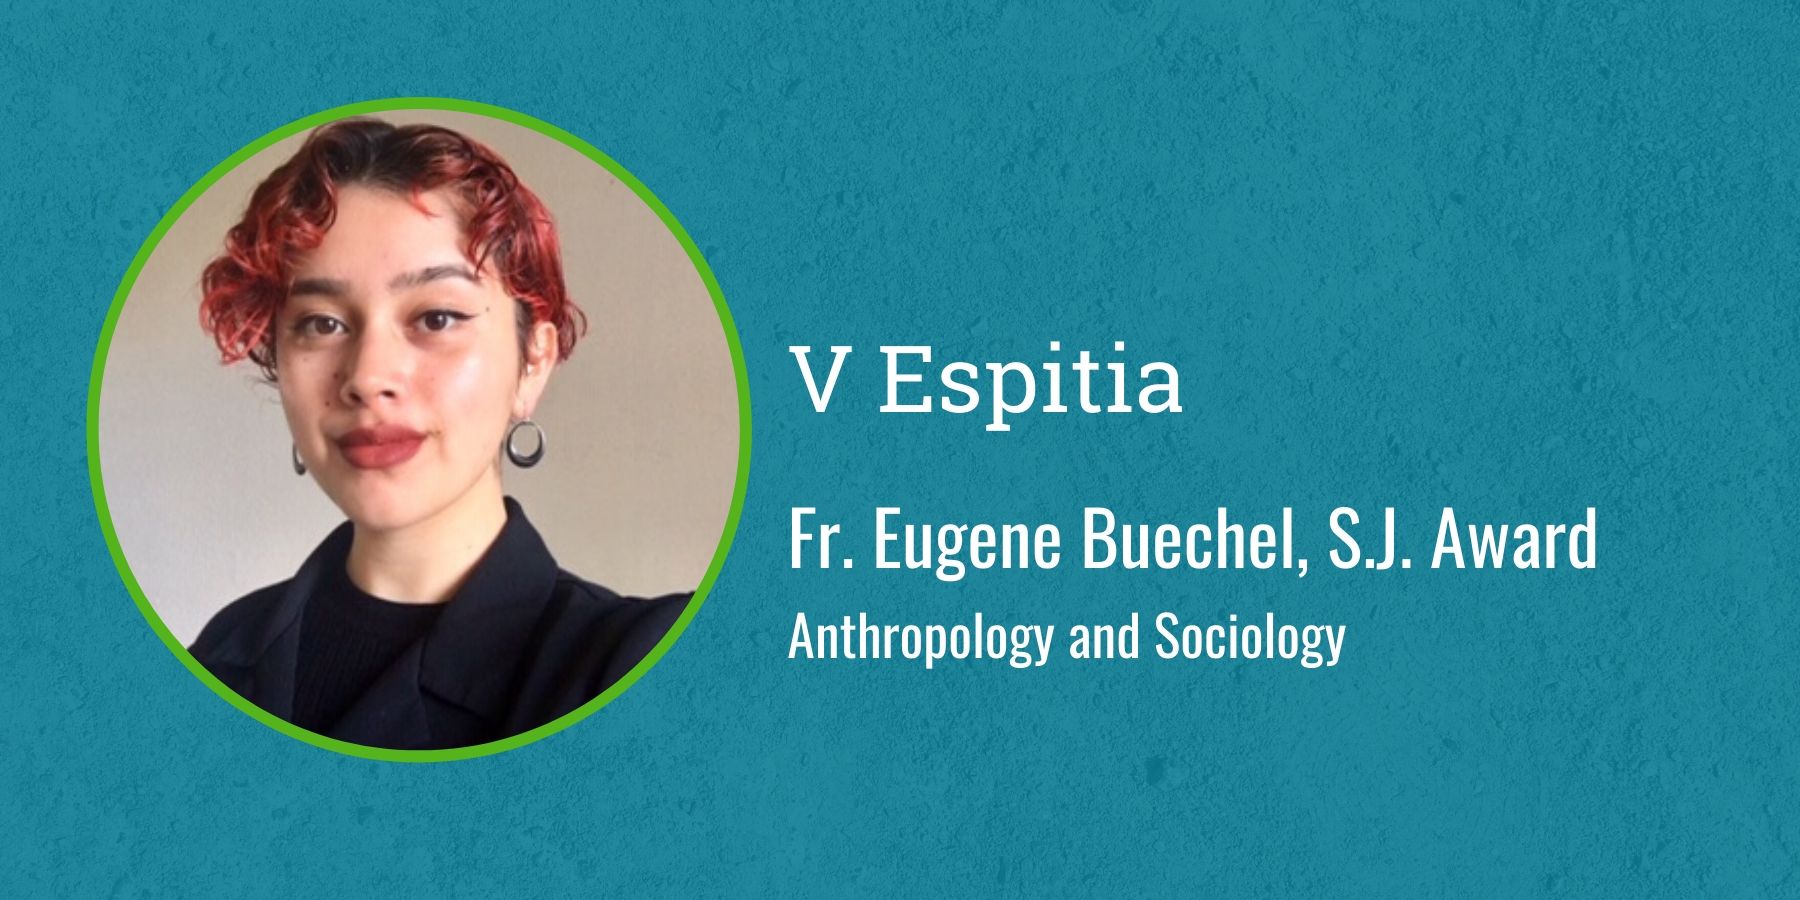 Photo of Veronica Espitia and text Fr. Eugene Buechel, S.J. Award, Anthropology and Sociology
